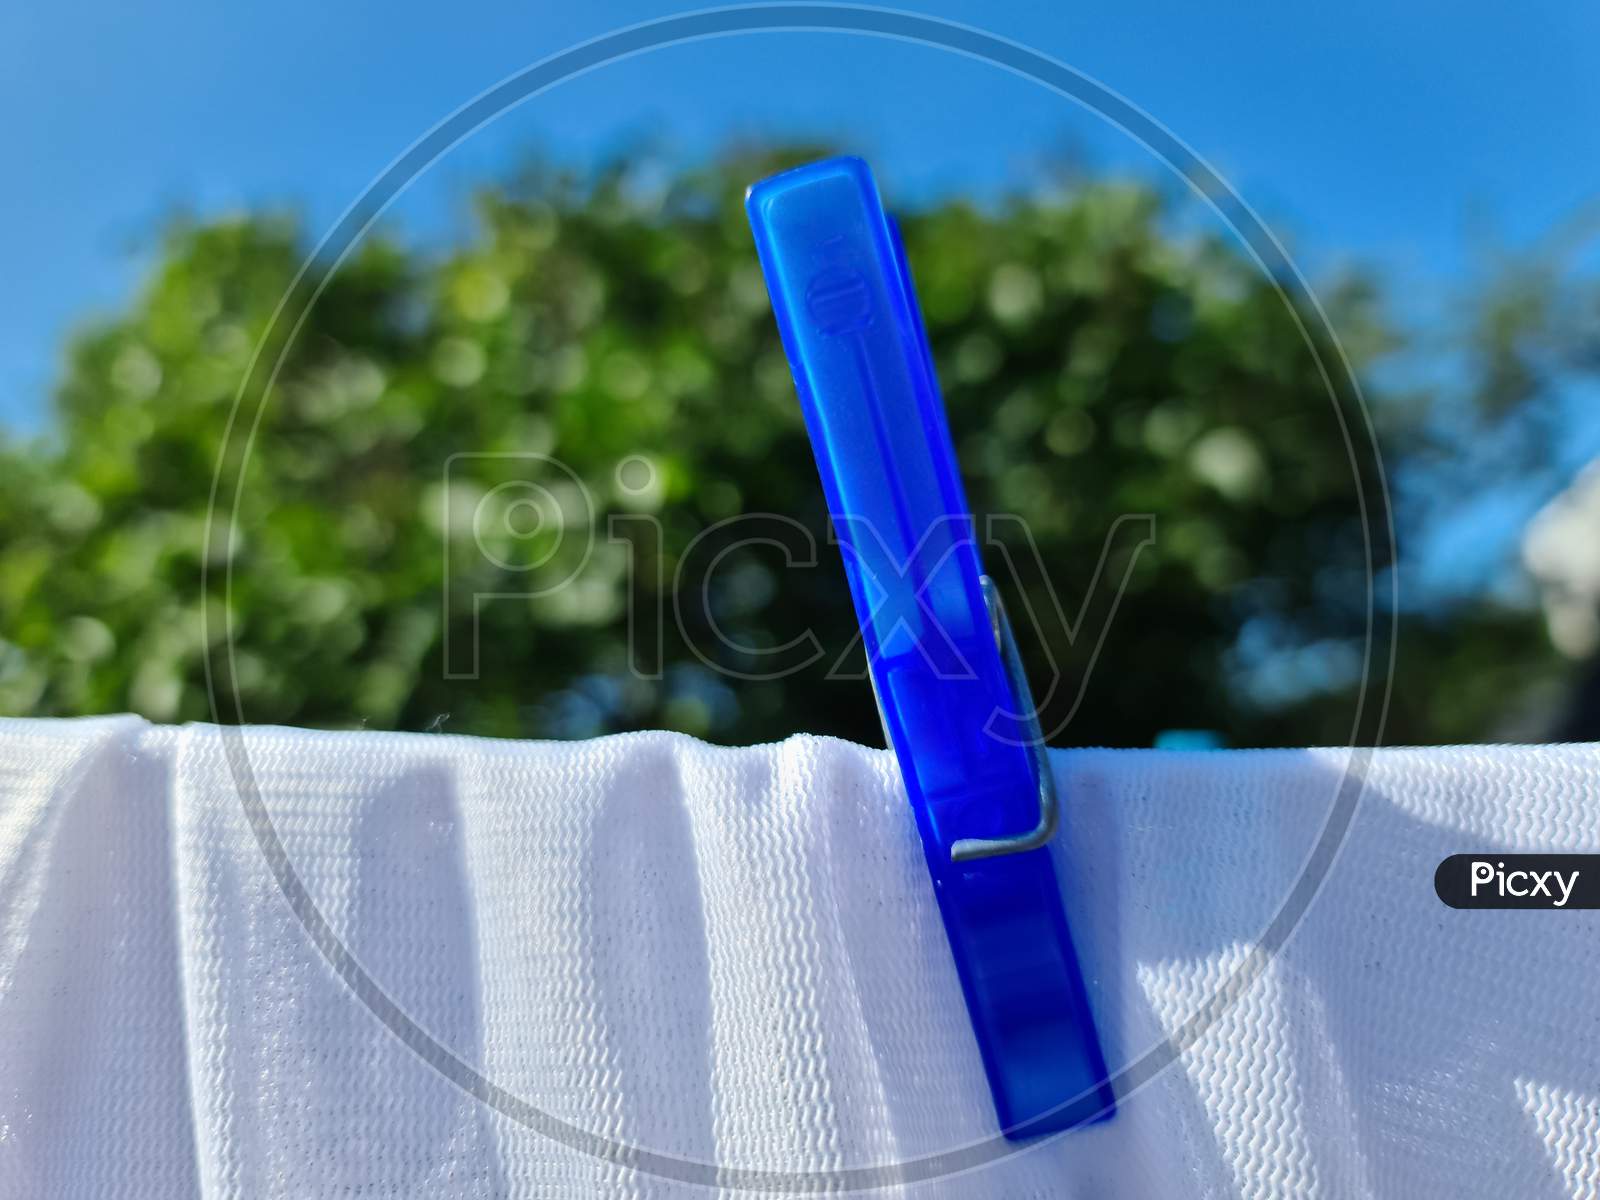 Clothes Hung Out On A Sunny Day To Dry On A Washing Line And Fastened By The Clothes Pegs..